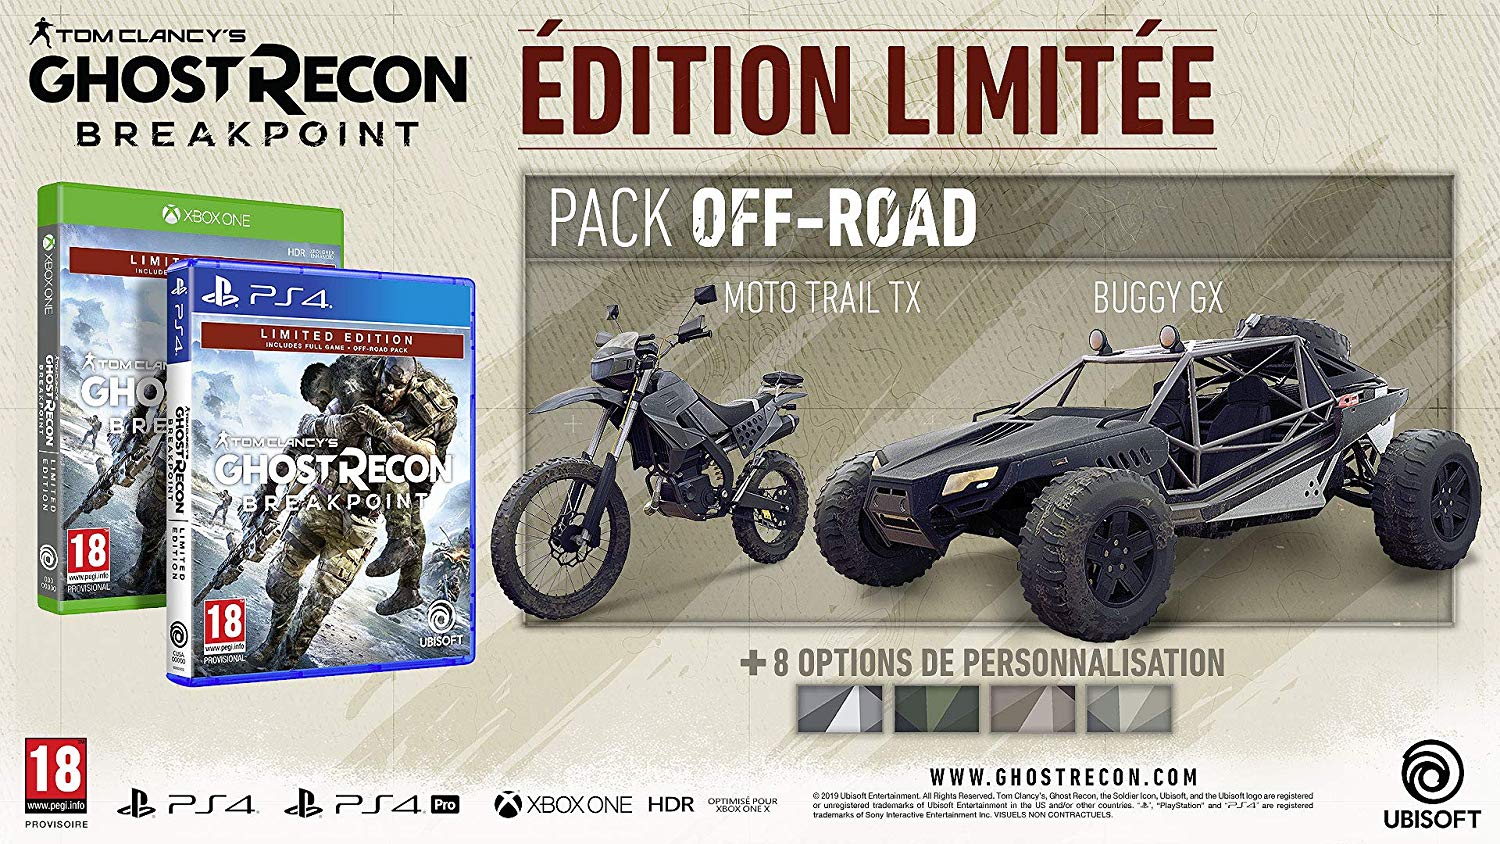 Ghost recon: breakpoint